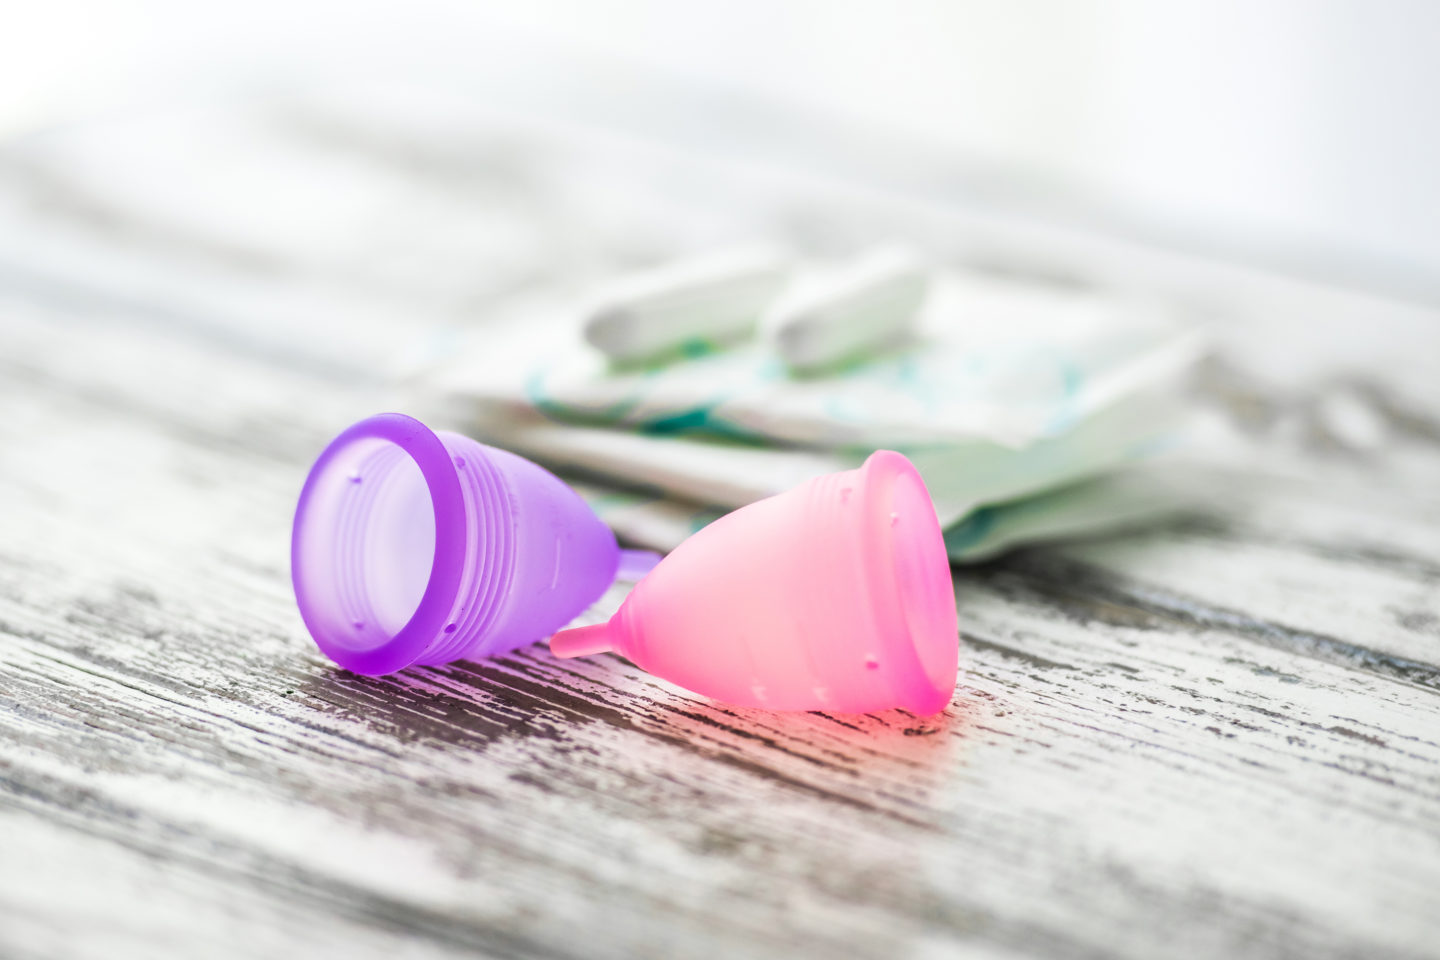 What You Need To Know About Organic Menstrual Products